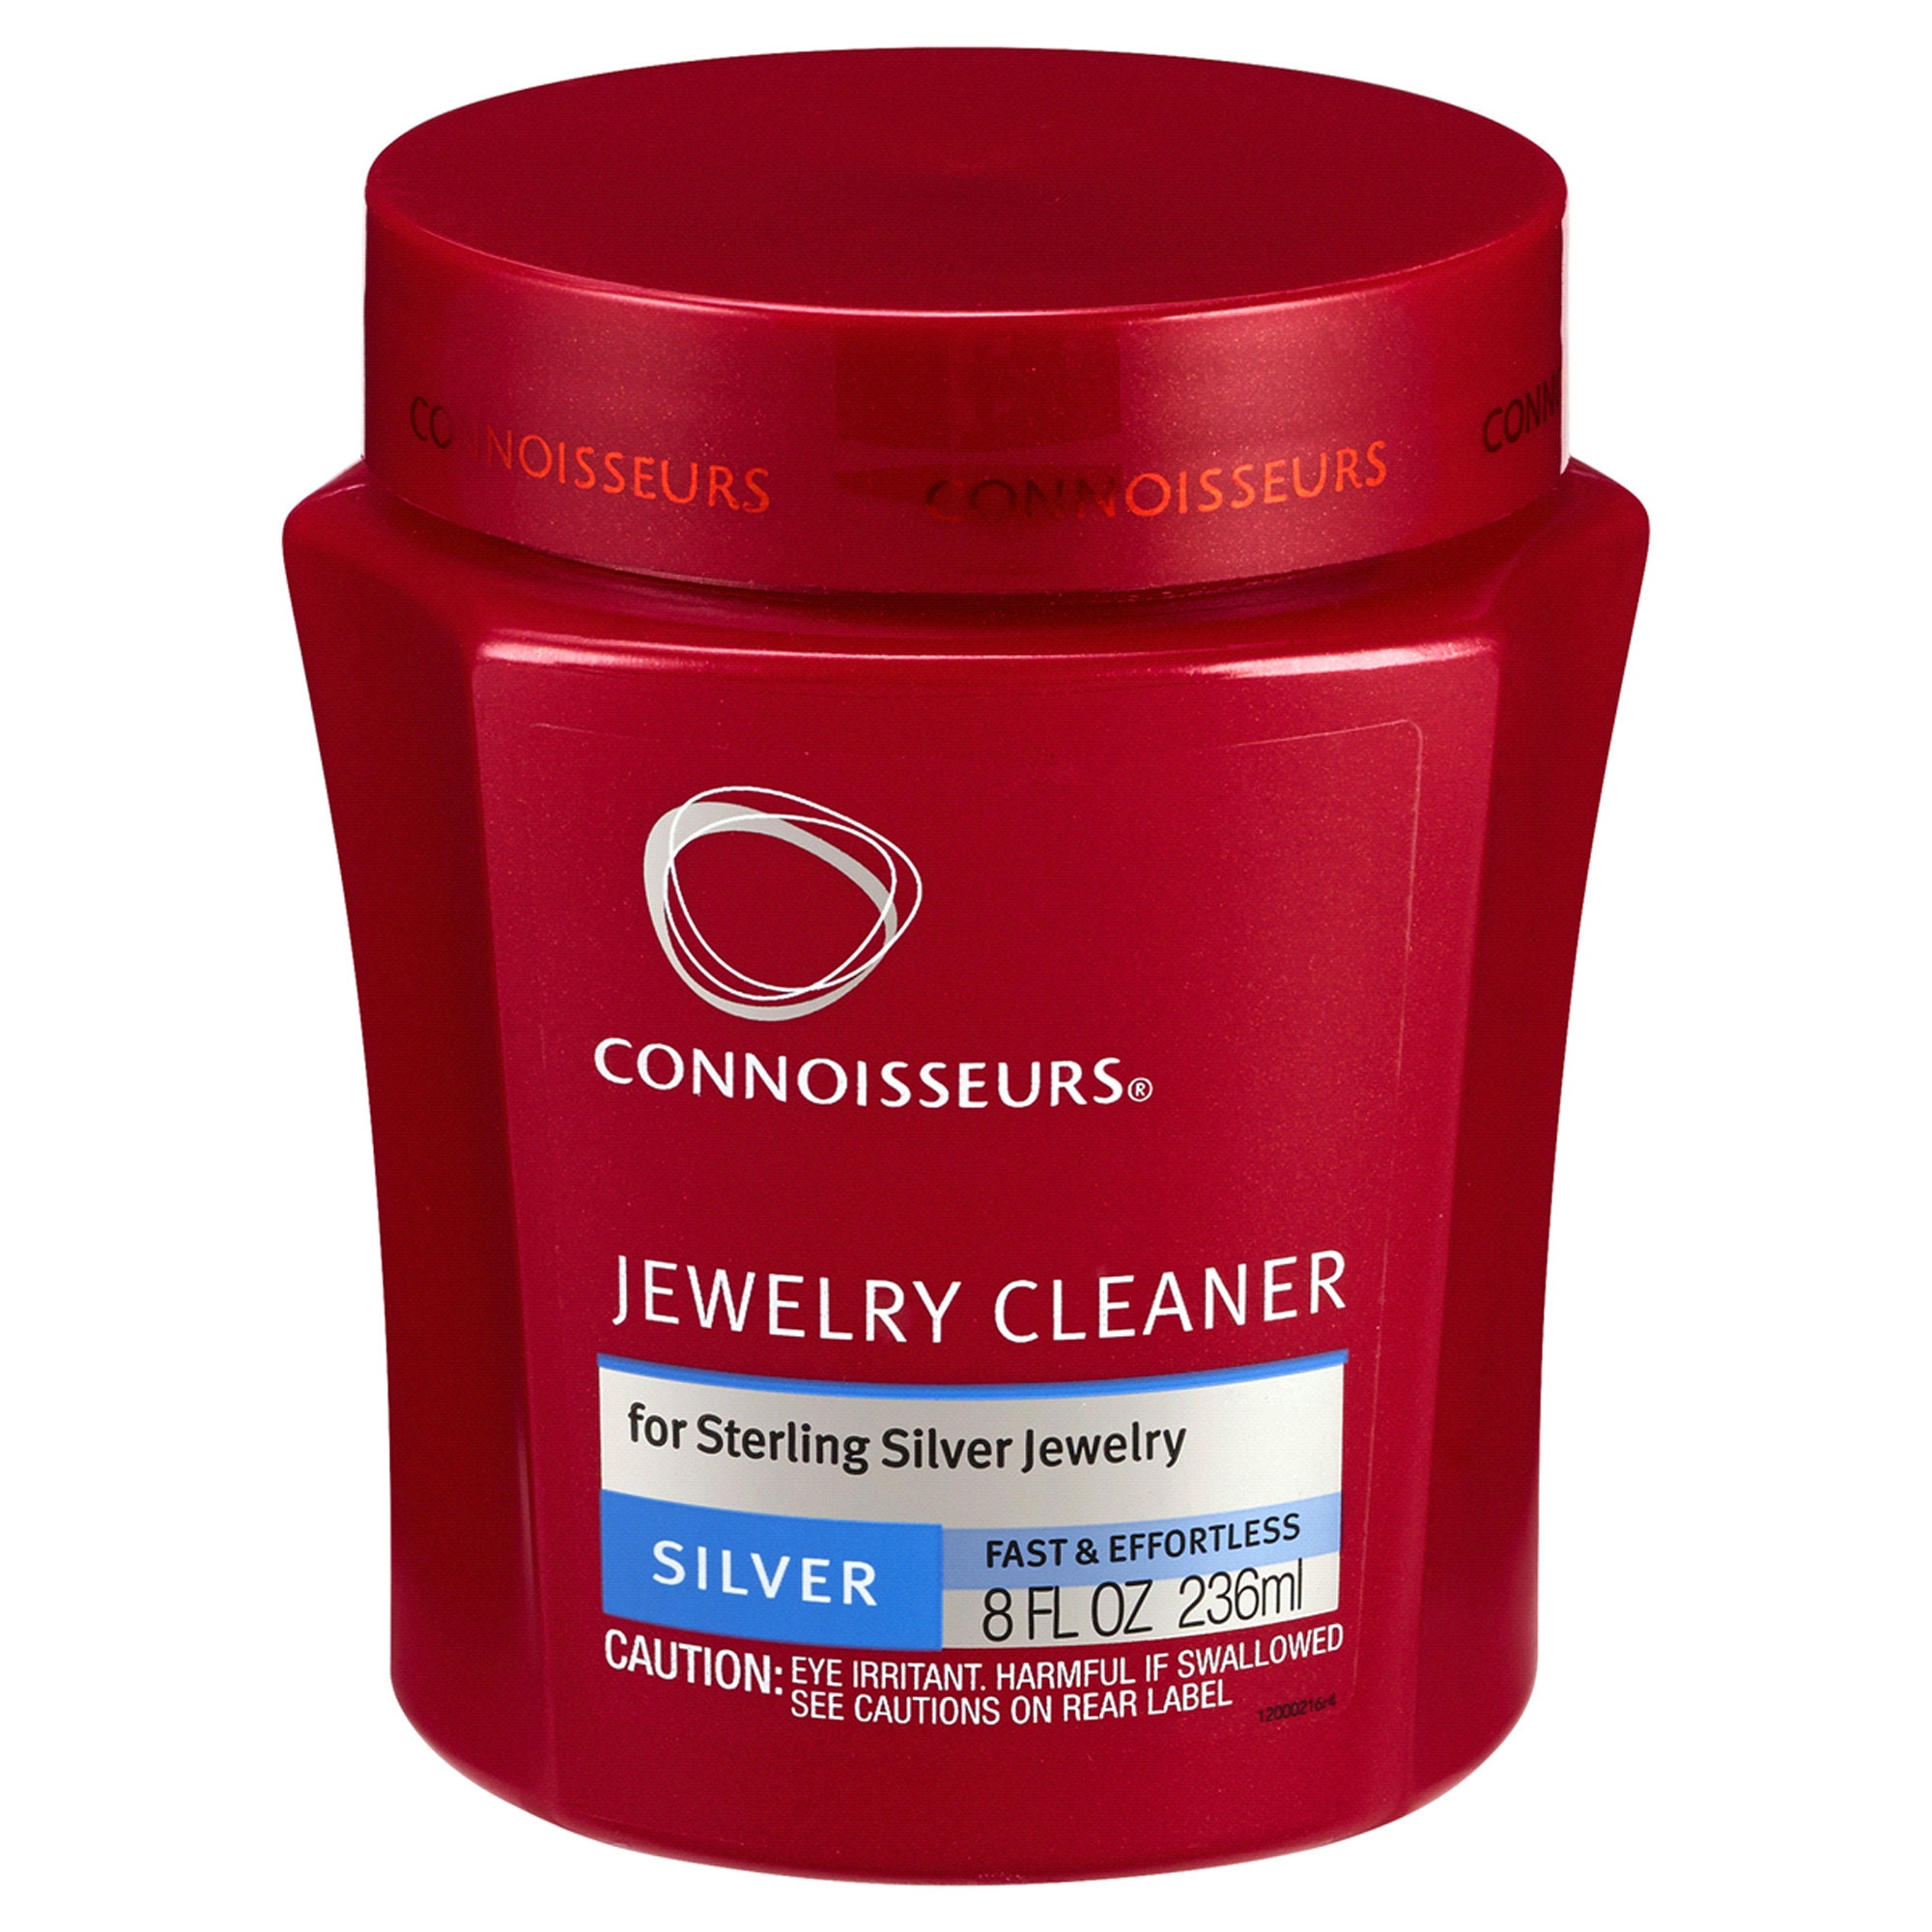 Hagerty Diamond Precious Stones & Jewelry Cleaner 8 oz with Dipping Basket